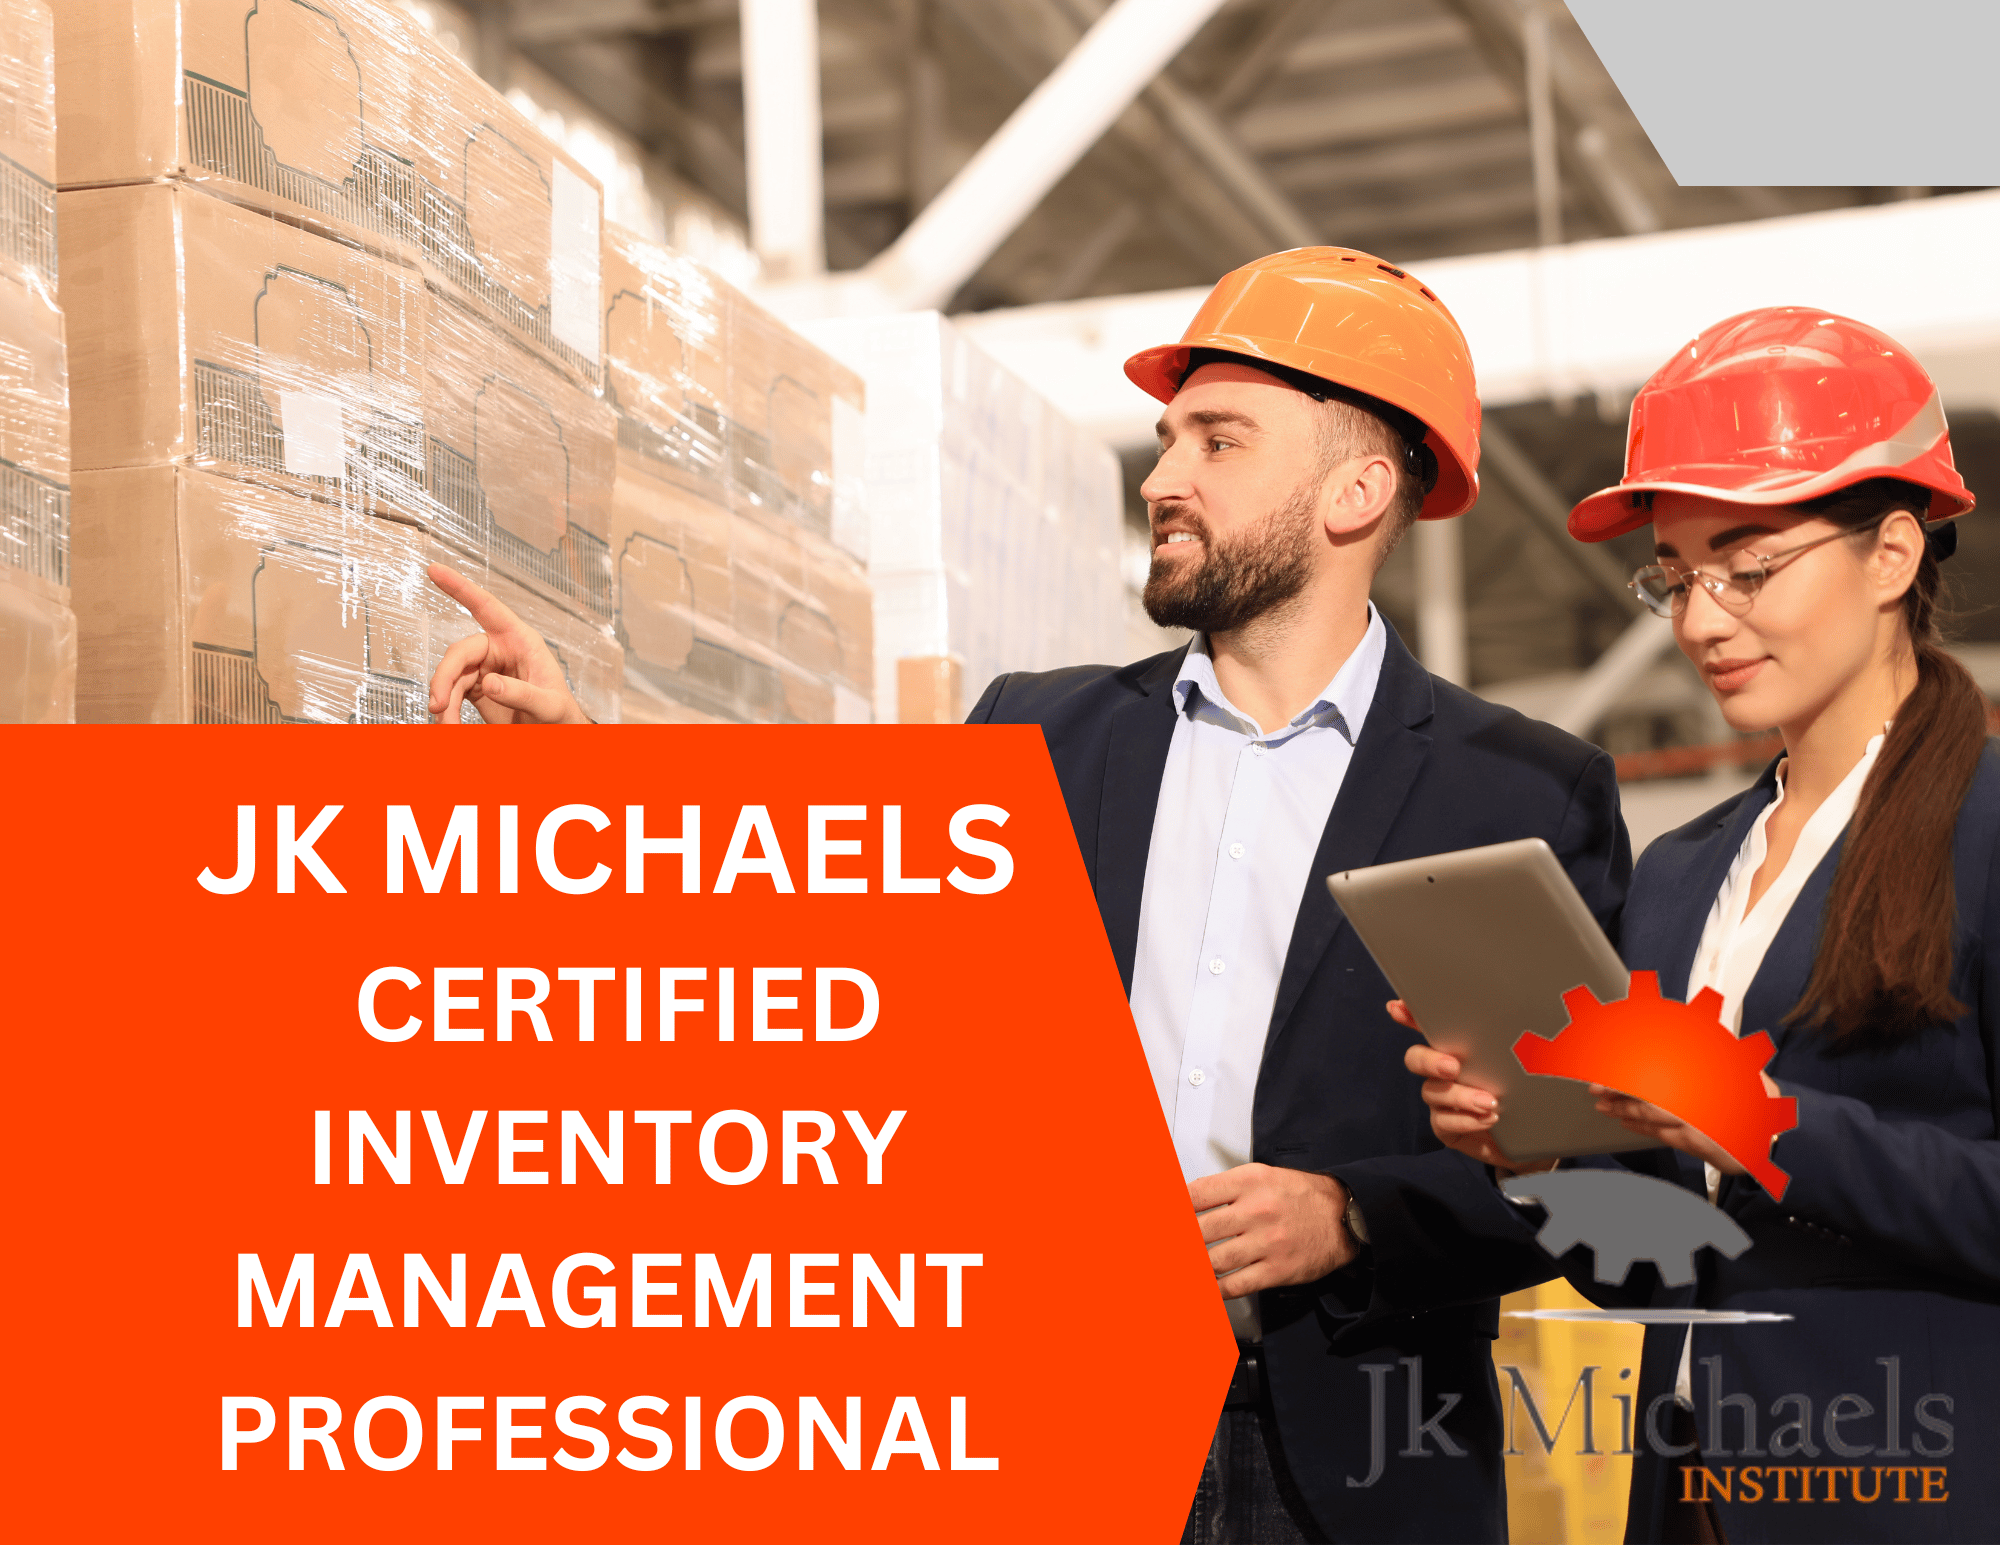 CERTIFIED INVENTORY MANAGEMENT PROFESSIONAL